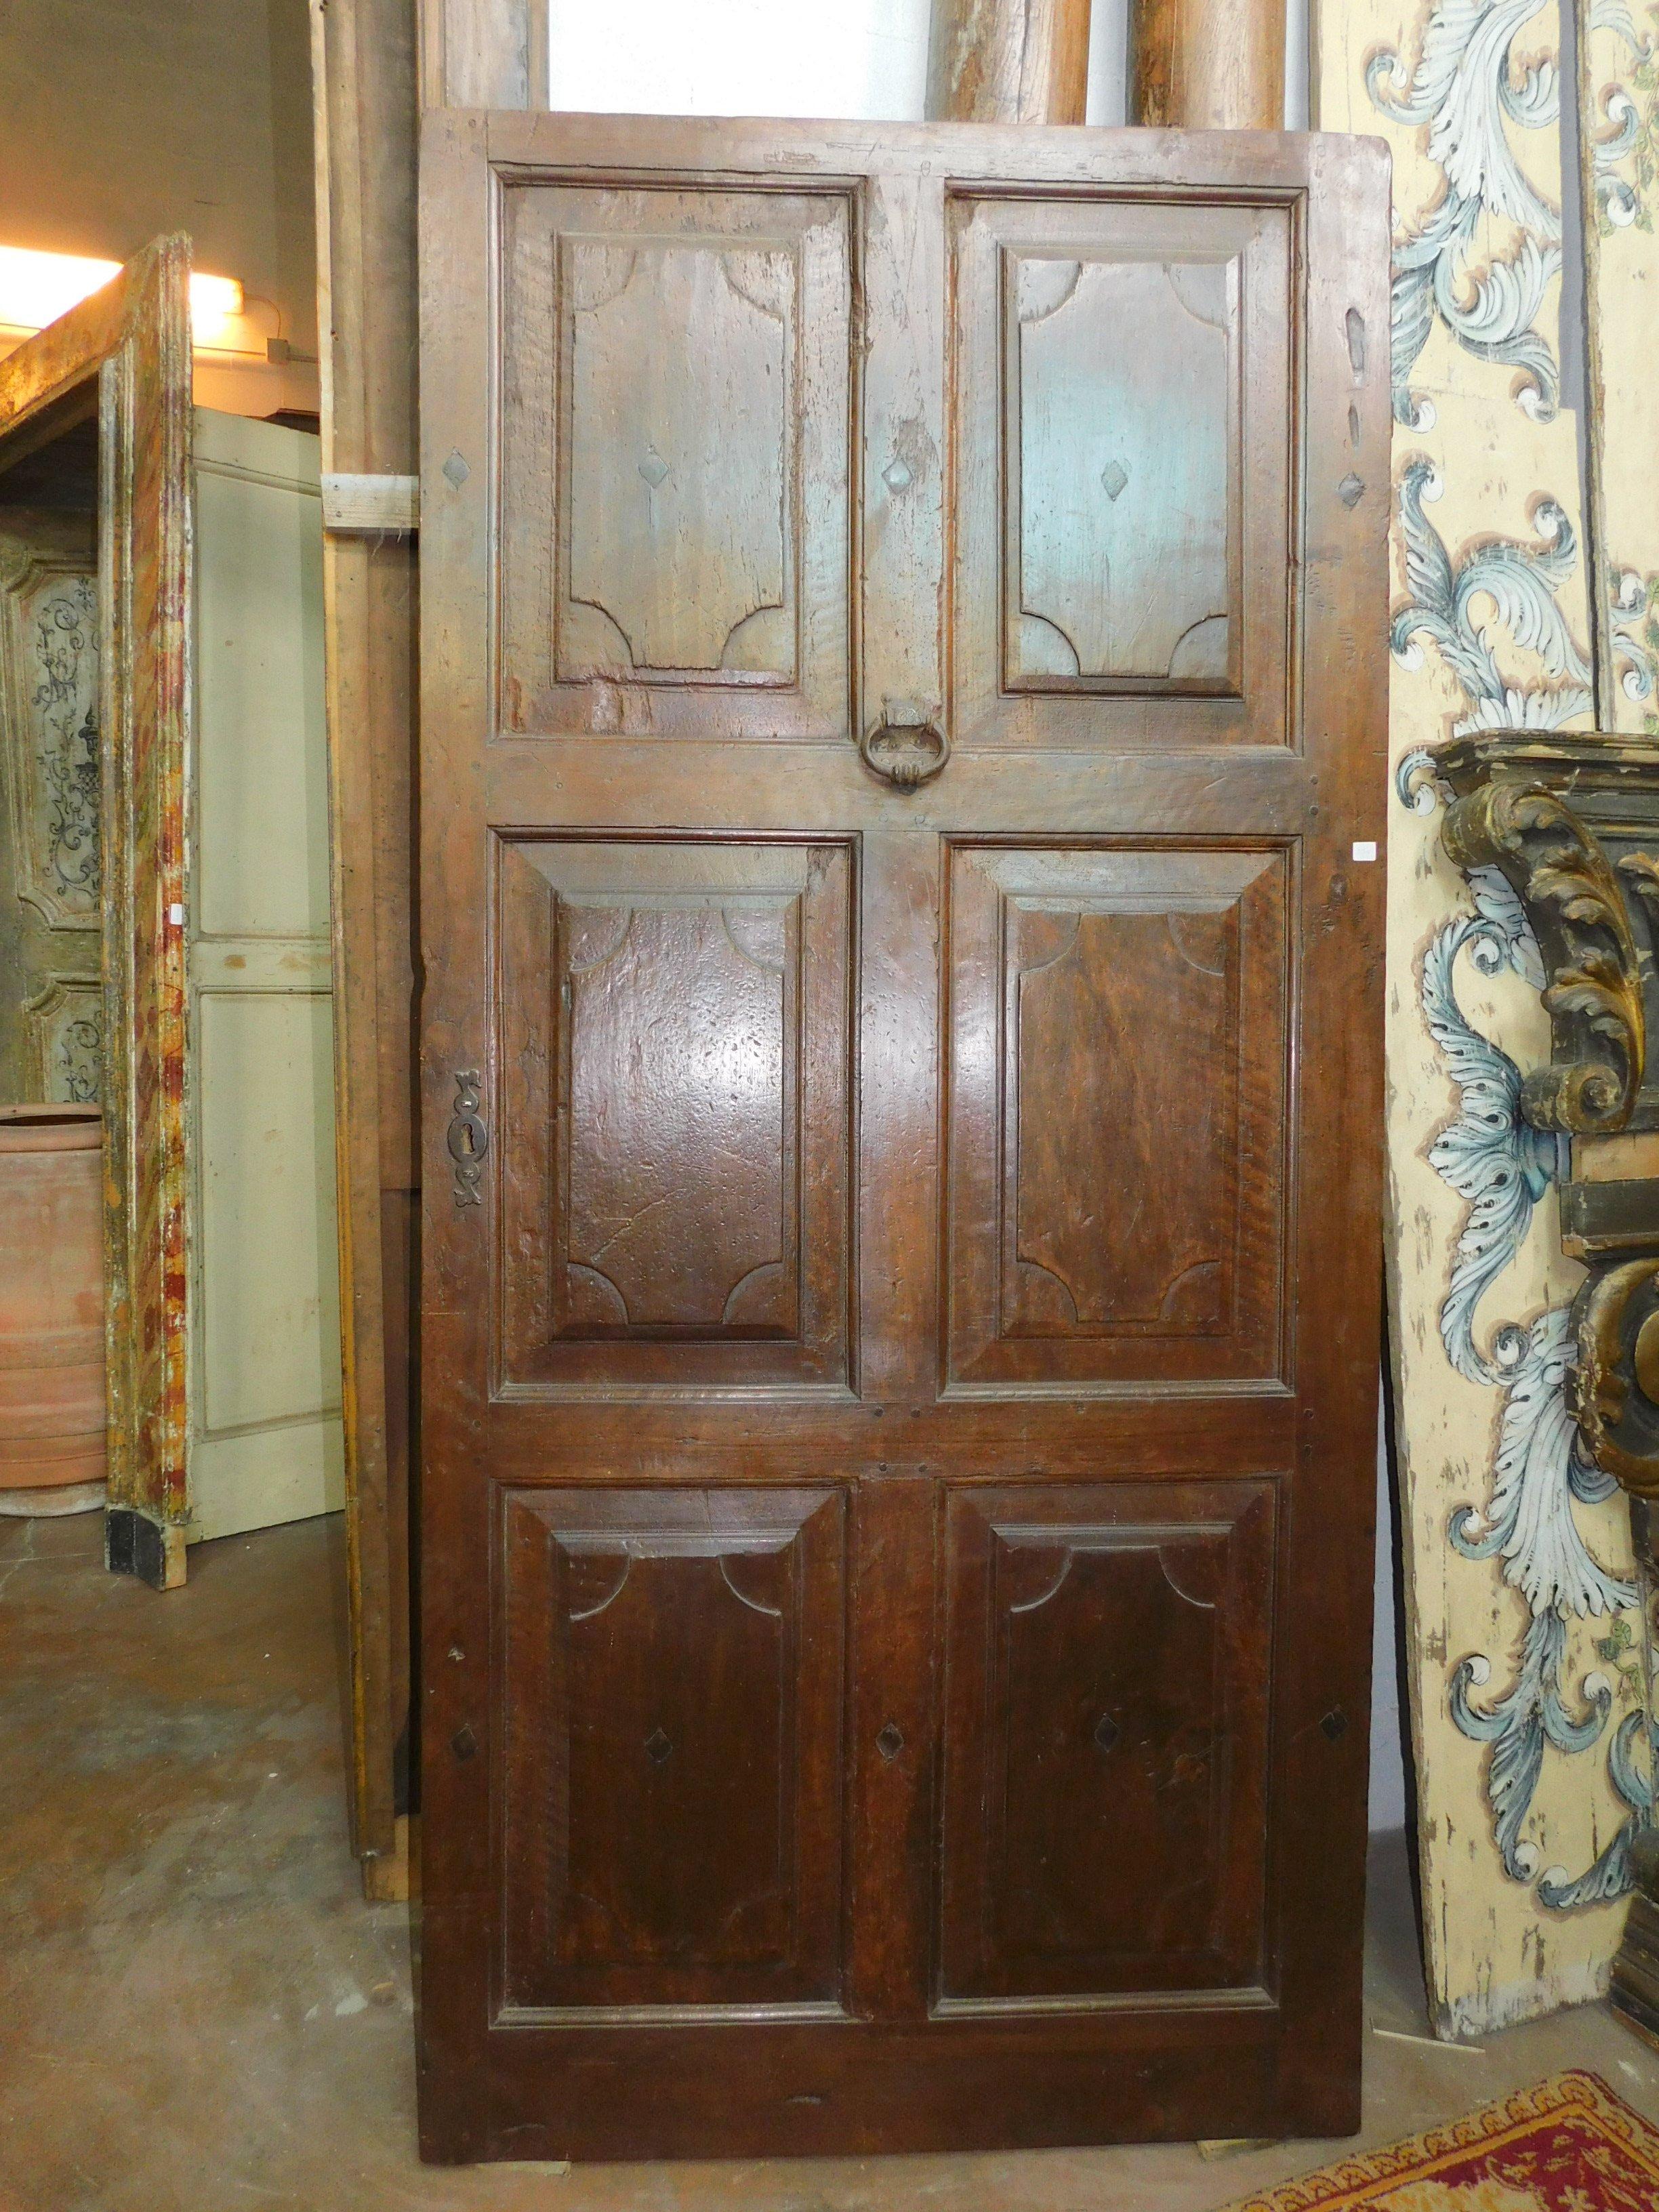 Antique entrance door in fine Italian dark walnut, hand carved with 6 tiles and typical design of the time, handcrafted in the 18th century, for entry into a building in the Italian historic center.
Precisely built in Piedmont, it has a smooth back